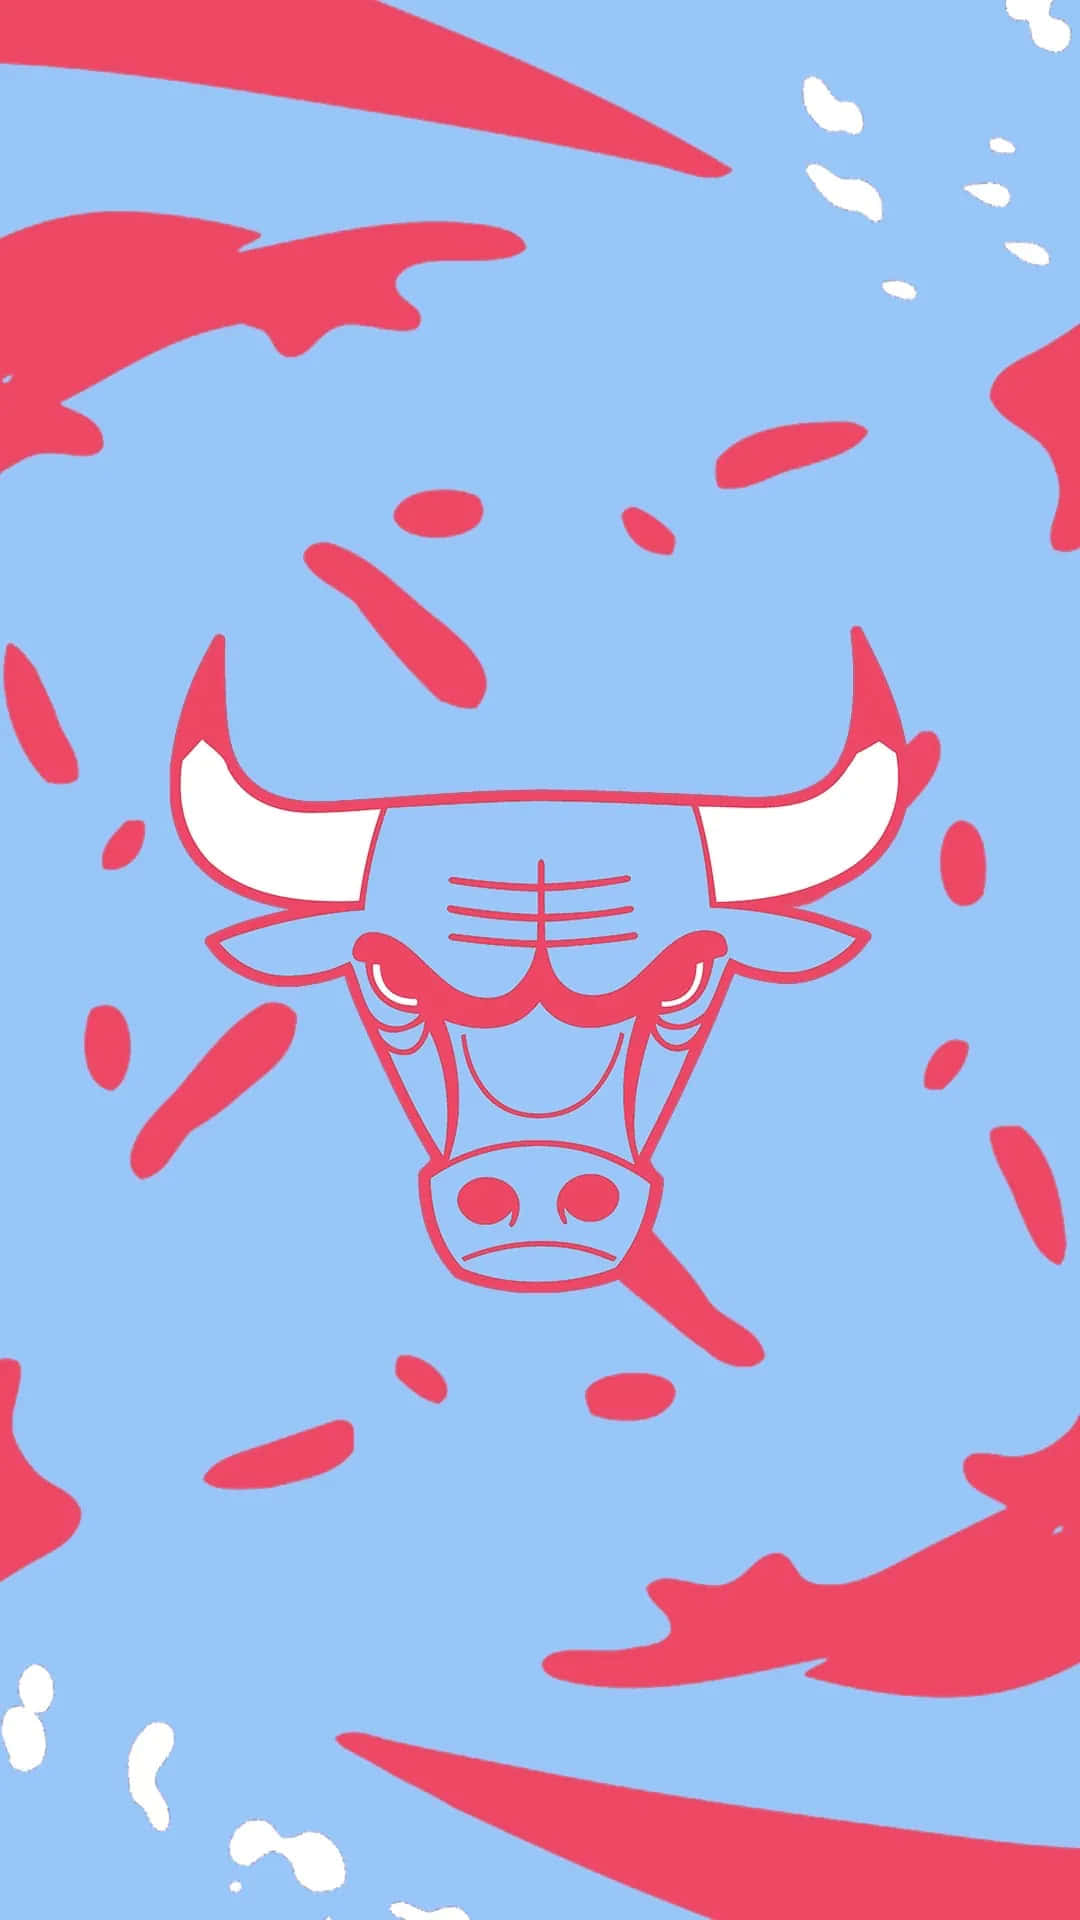 Keep The Spirit Of The Chicago Bulls Burning On Your Device With This Vibrant Wallpaper. Background